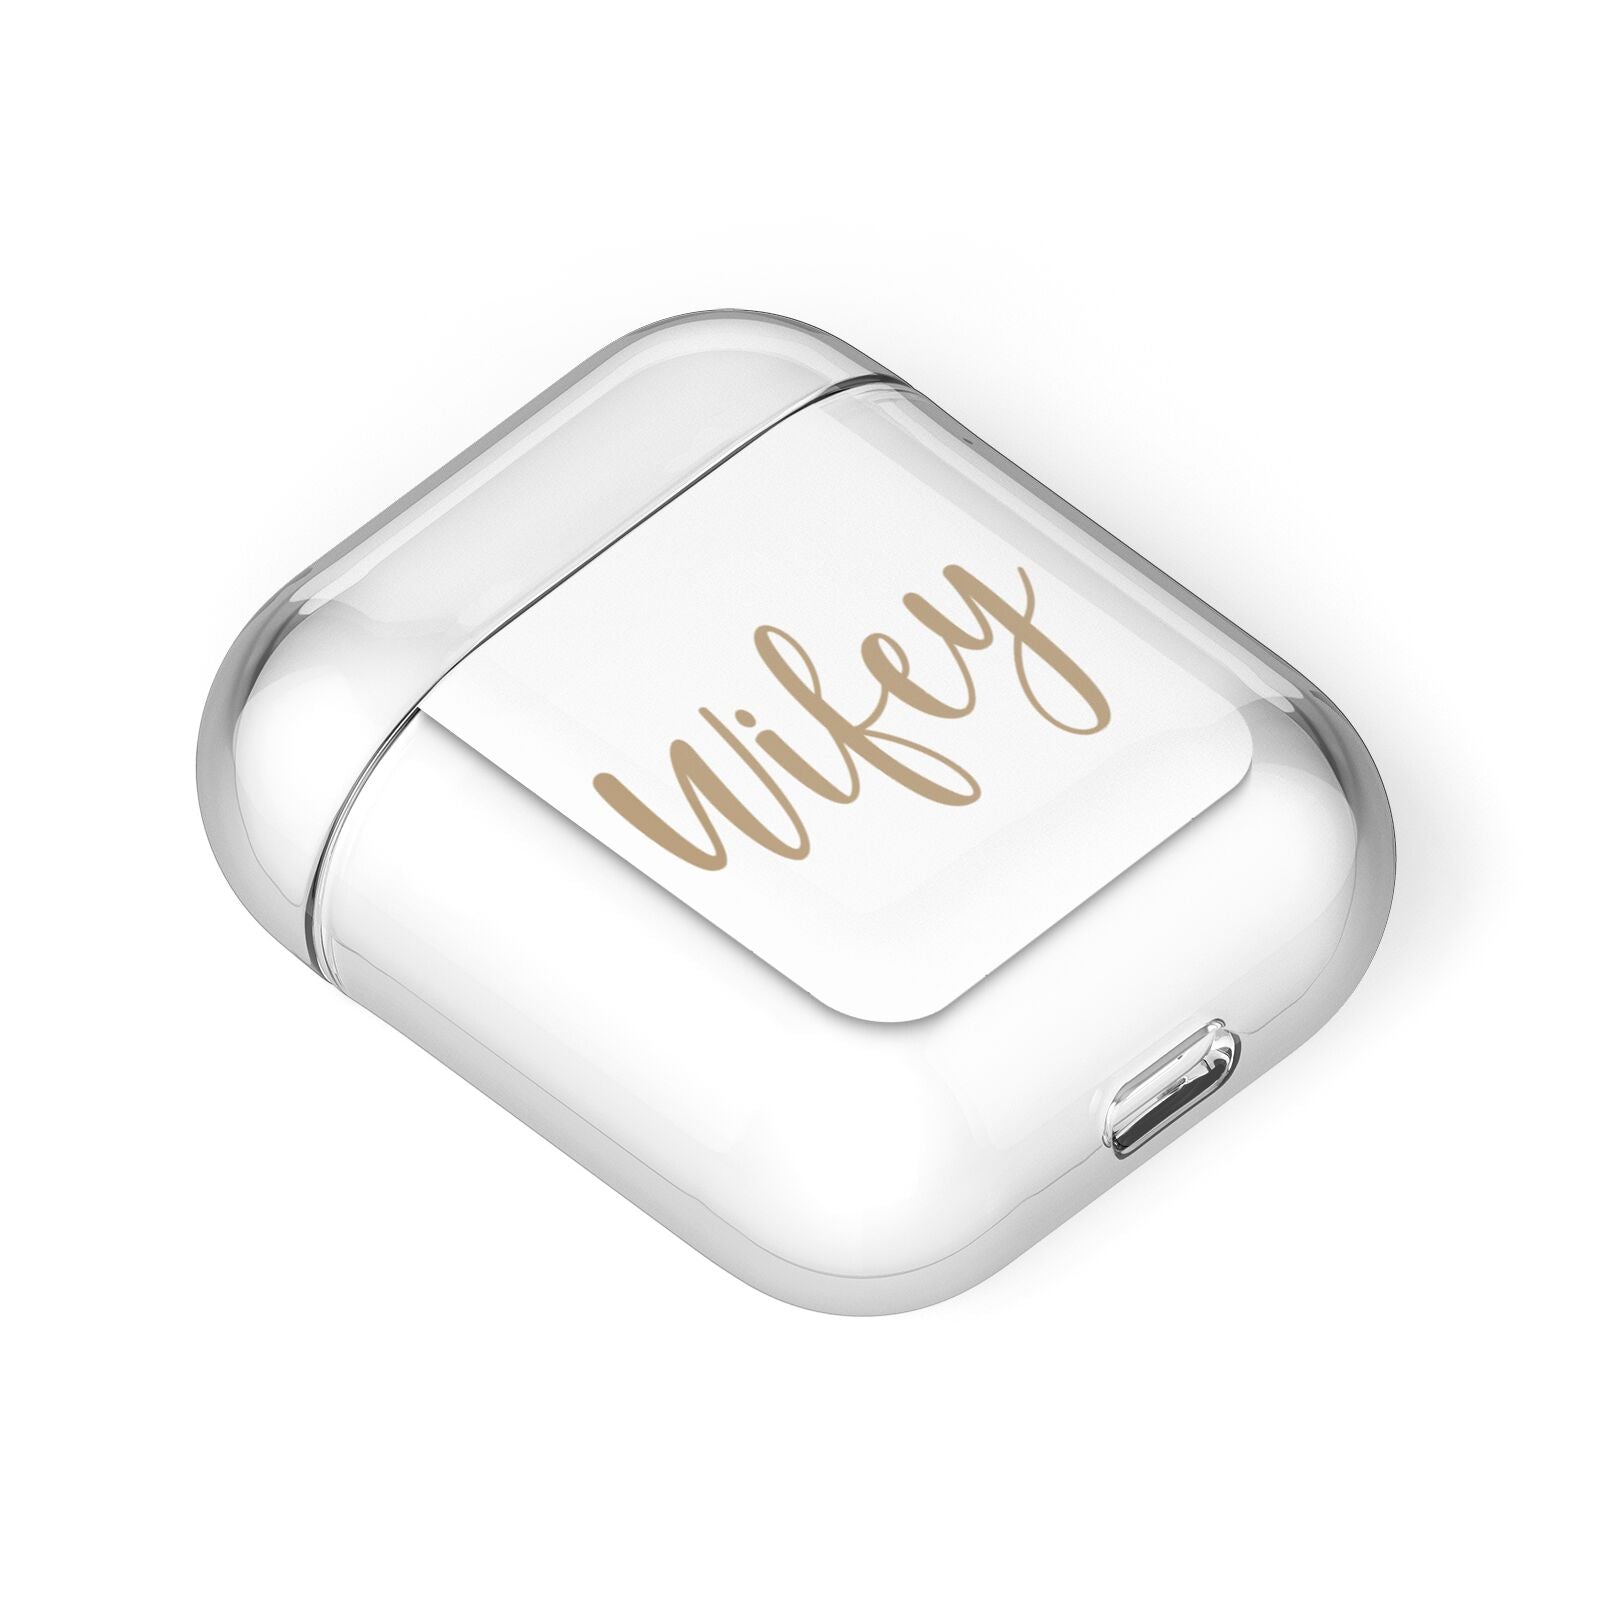 Wifey AirPods Case Laid Flat